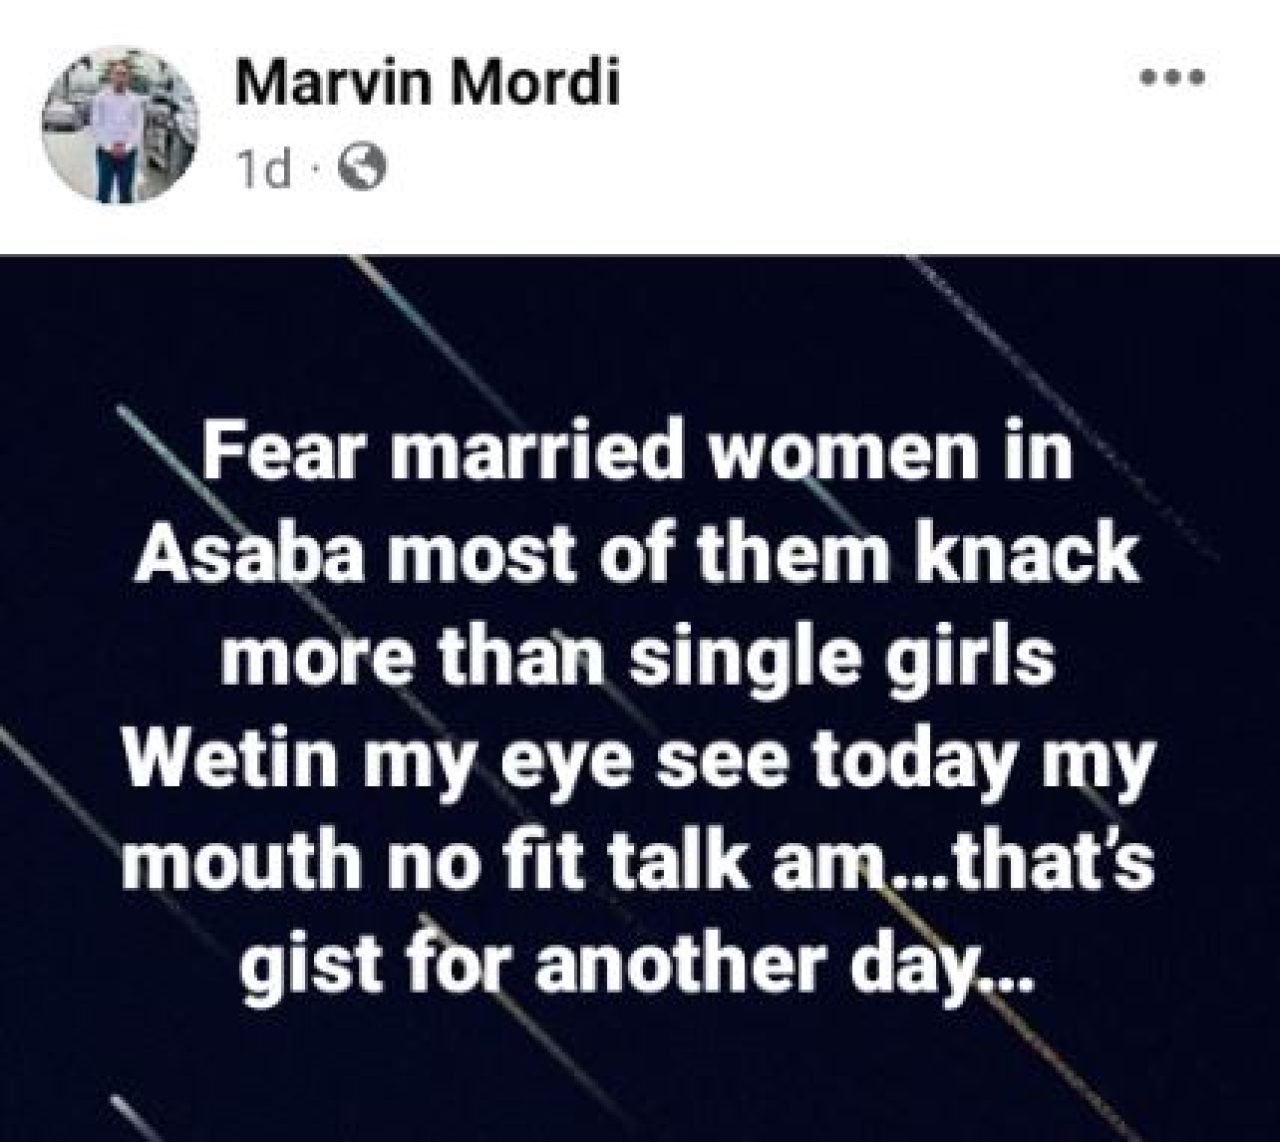 'Fear married women in Asaba' - Nigerian activist expresses shock. Afro News Wire